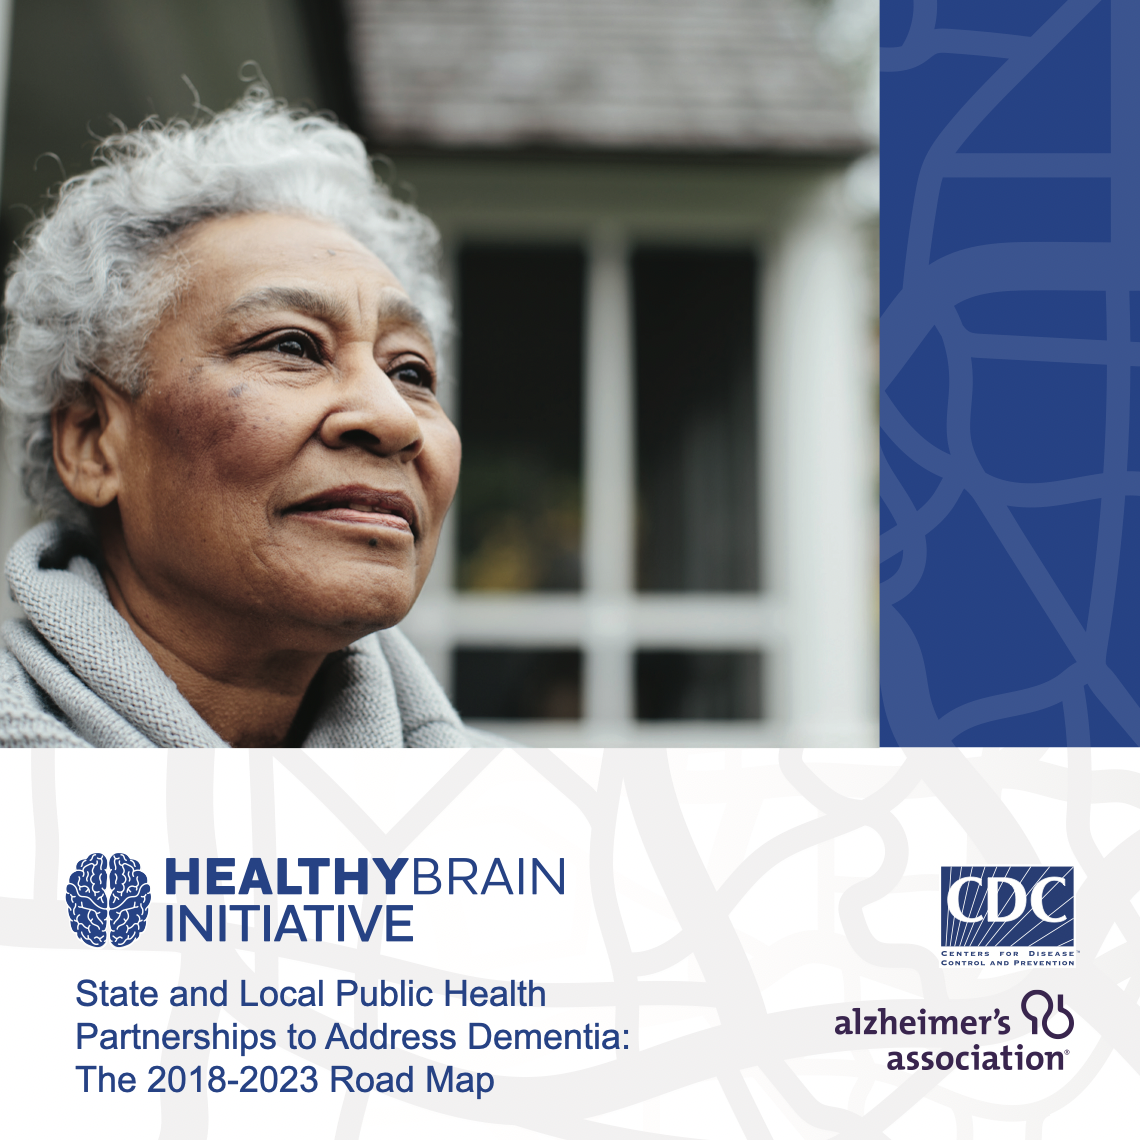 Healthy Brain Initiative. State and Local Public Health Partnerships to Address Dementia: The 2018-2023 Road Map(CDC)